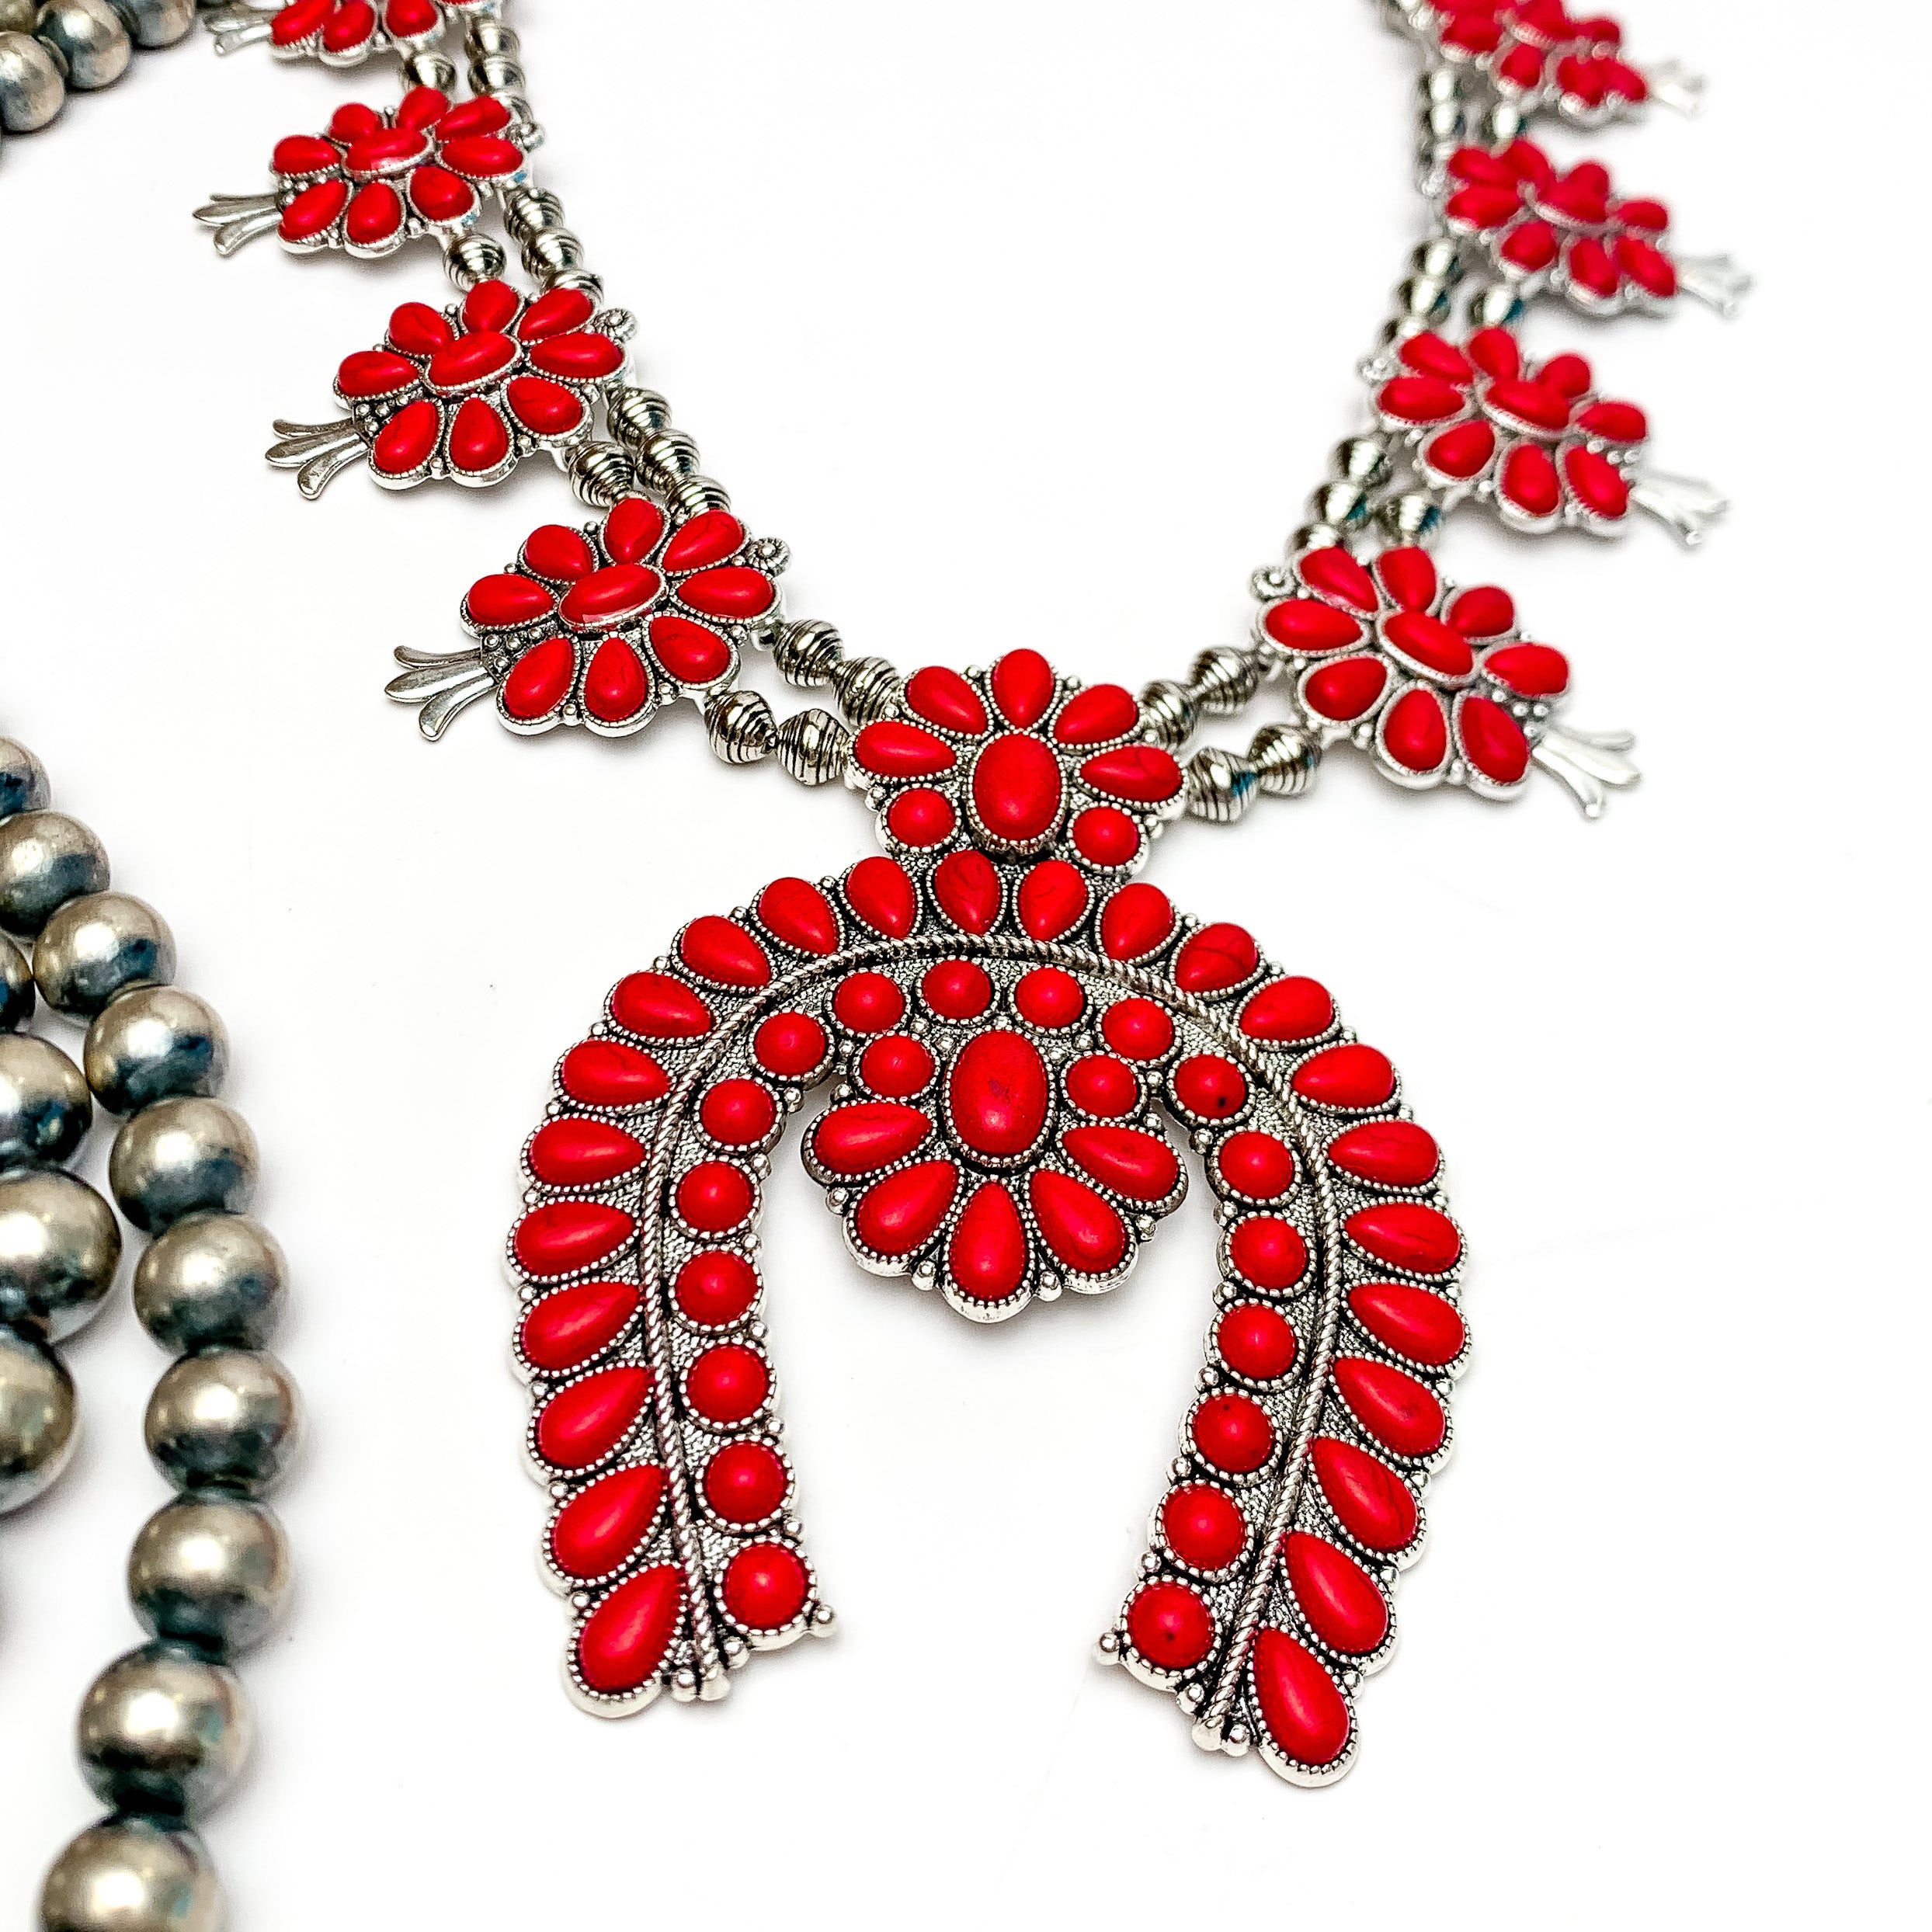 Western Women Squash Blossom Necklace in Red - Giddy Up Glamour Boutique